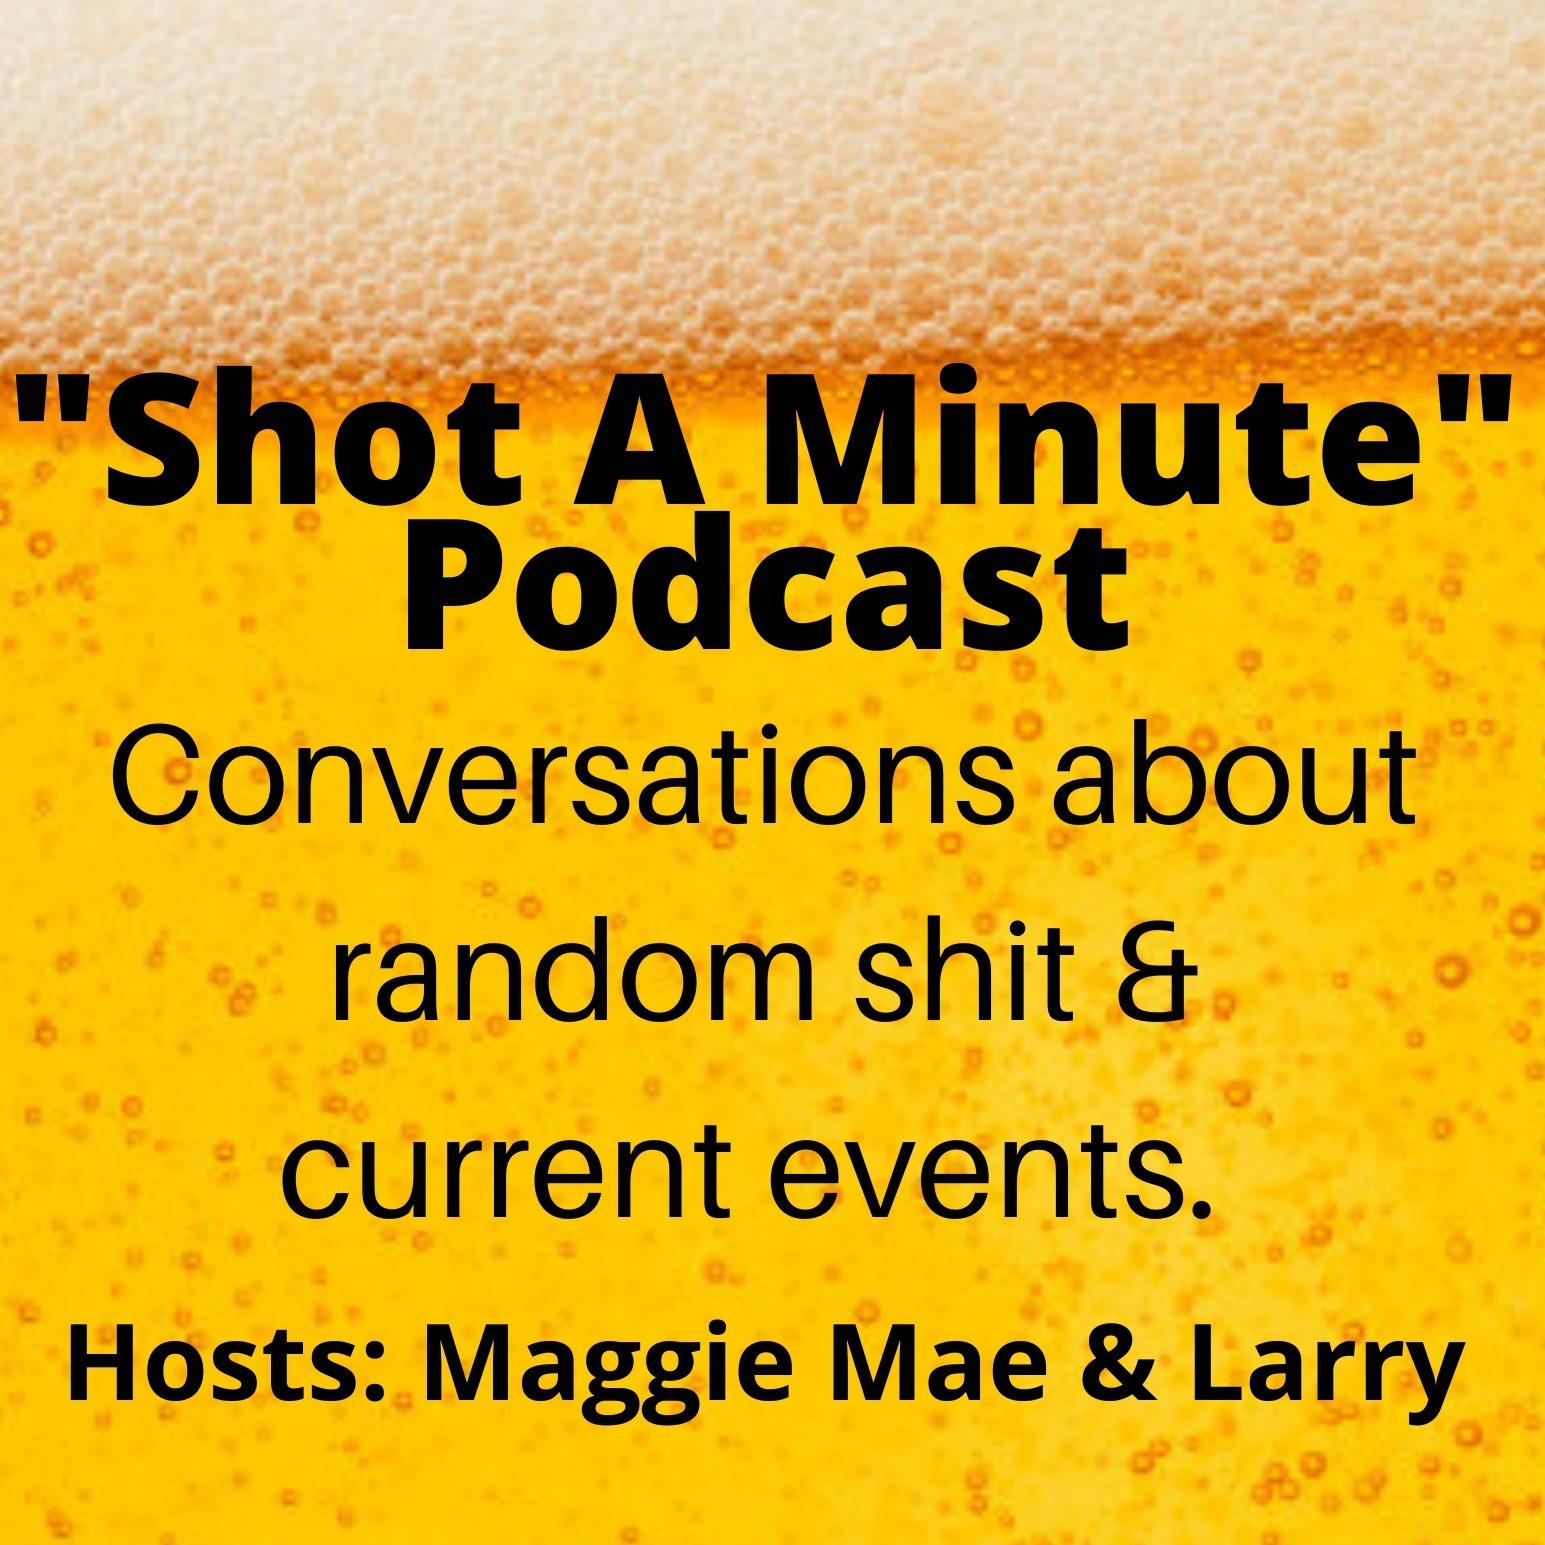 "Shot A Minute" Podcast